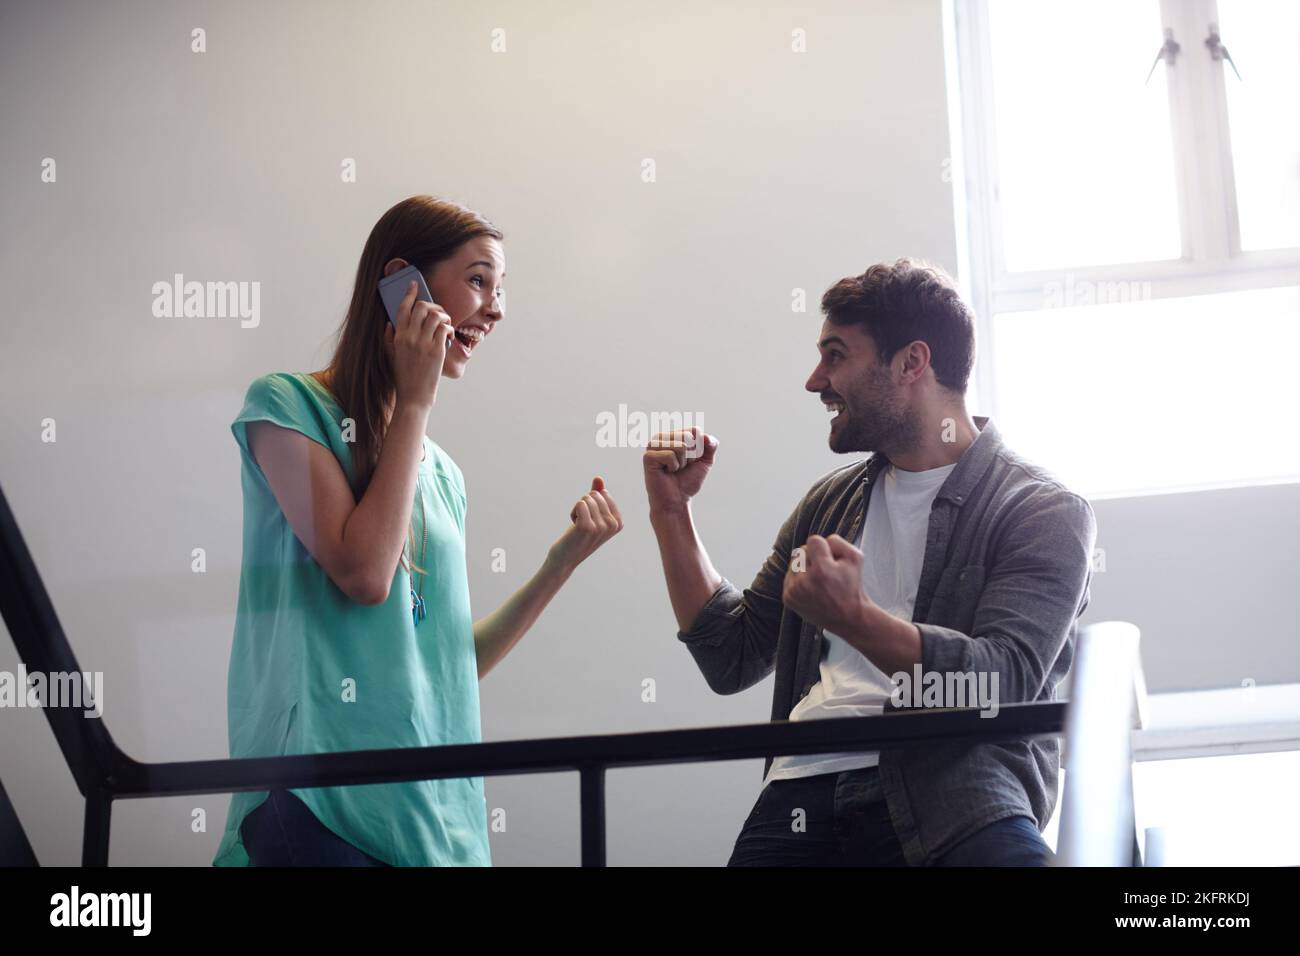 Waiting for the awesome news. an ecstatic woman on her phone and an excited friend. Stock Photo